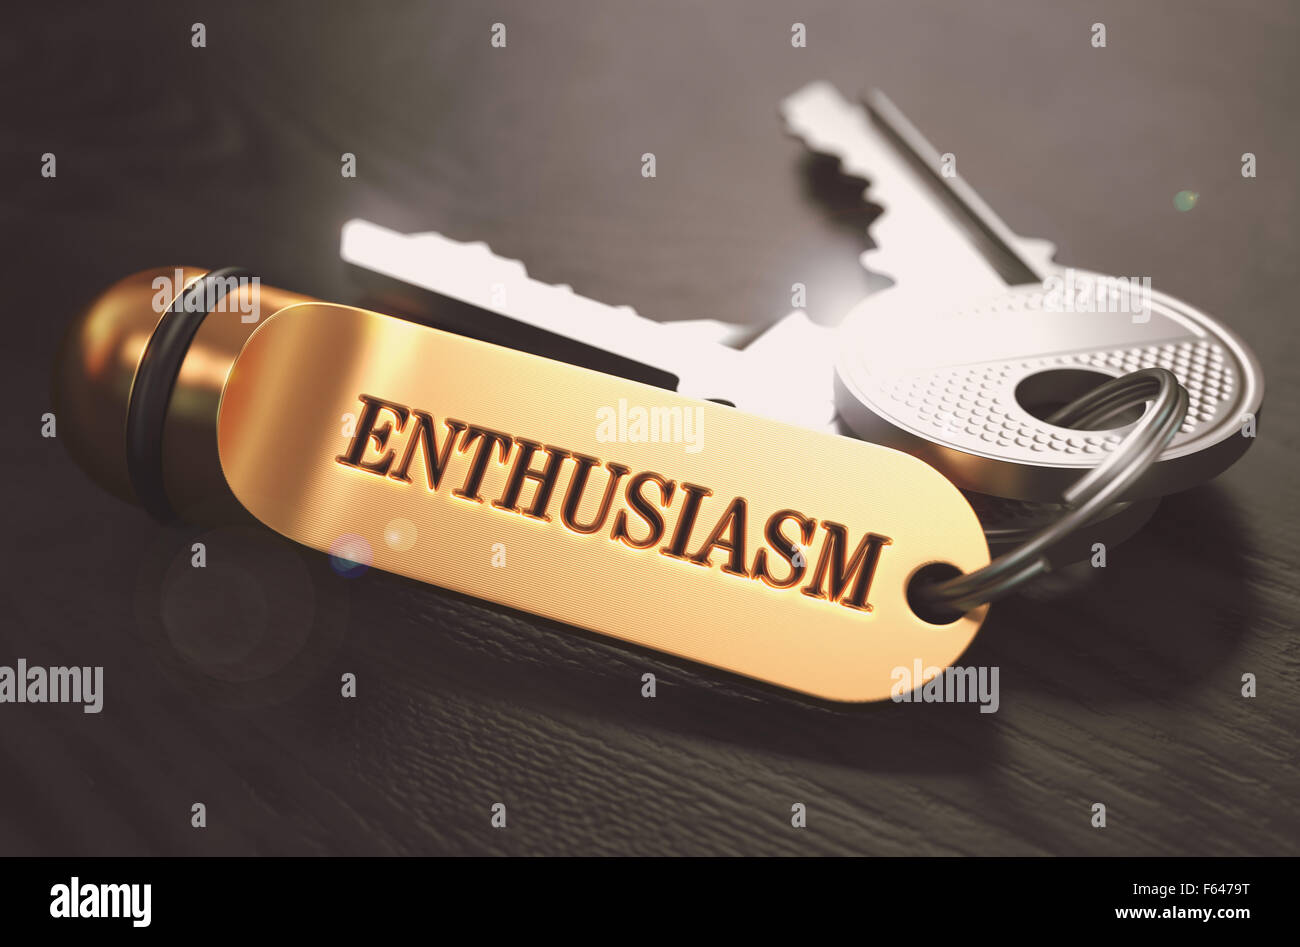 Enthusiasm Concept. Keys with Golden Keyring on Black Wooden Table. Closeup View, Selective Focus, 3D Render. Toned Image. Stock Photo